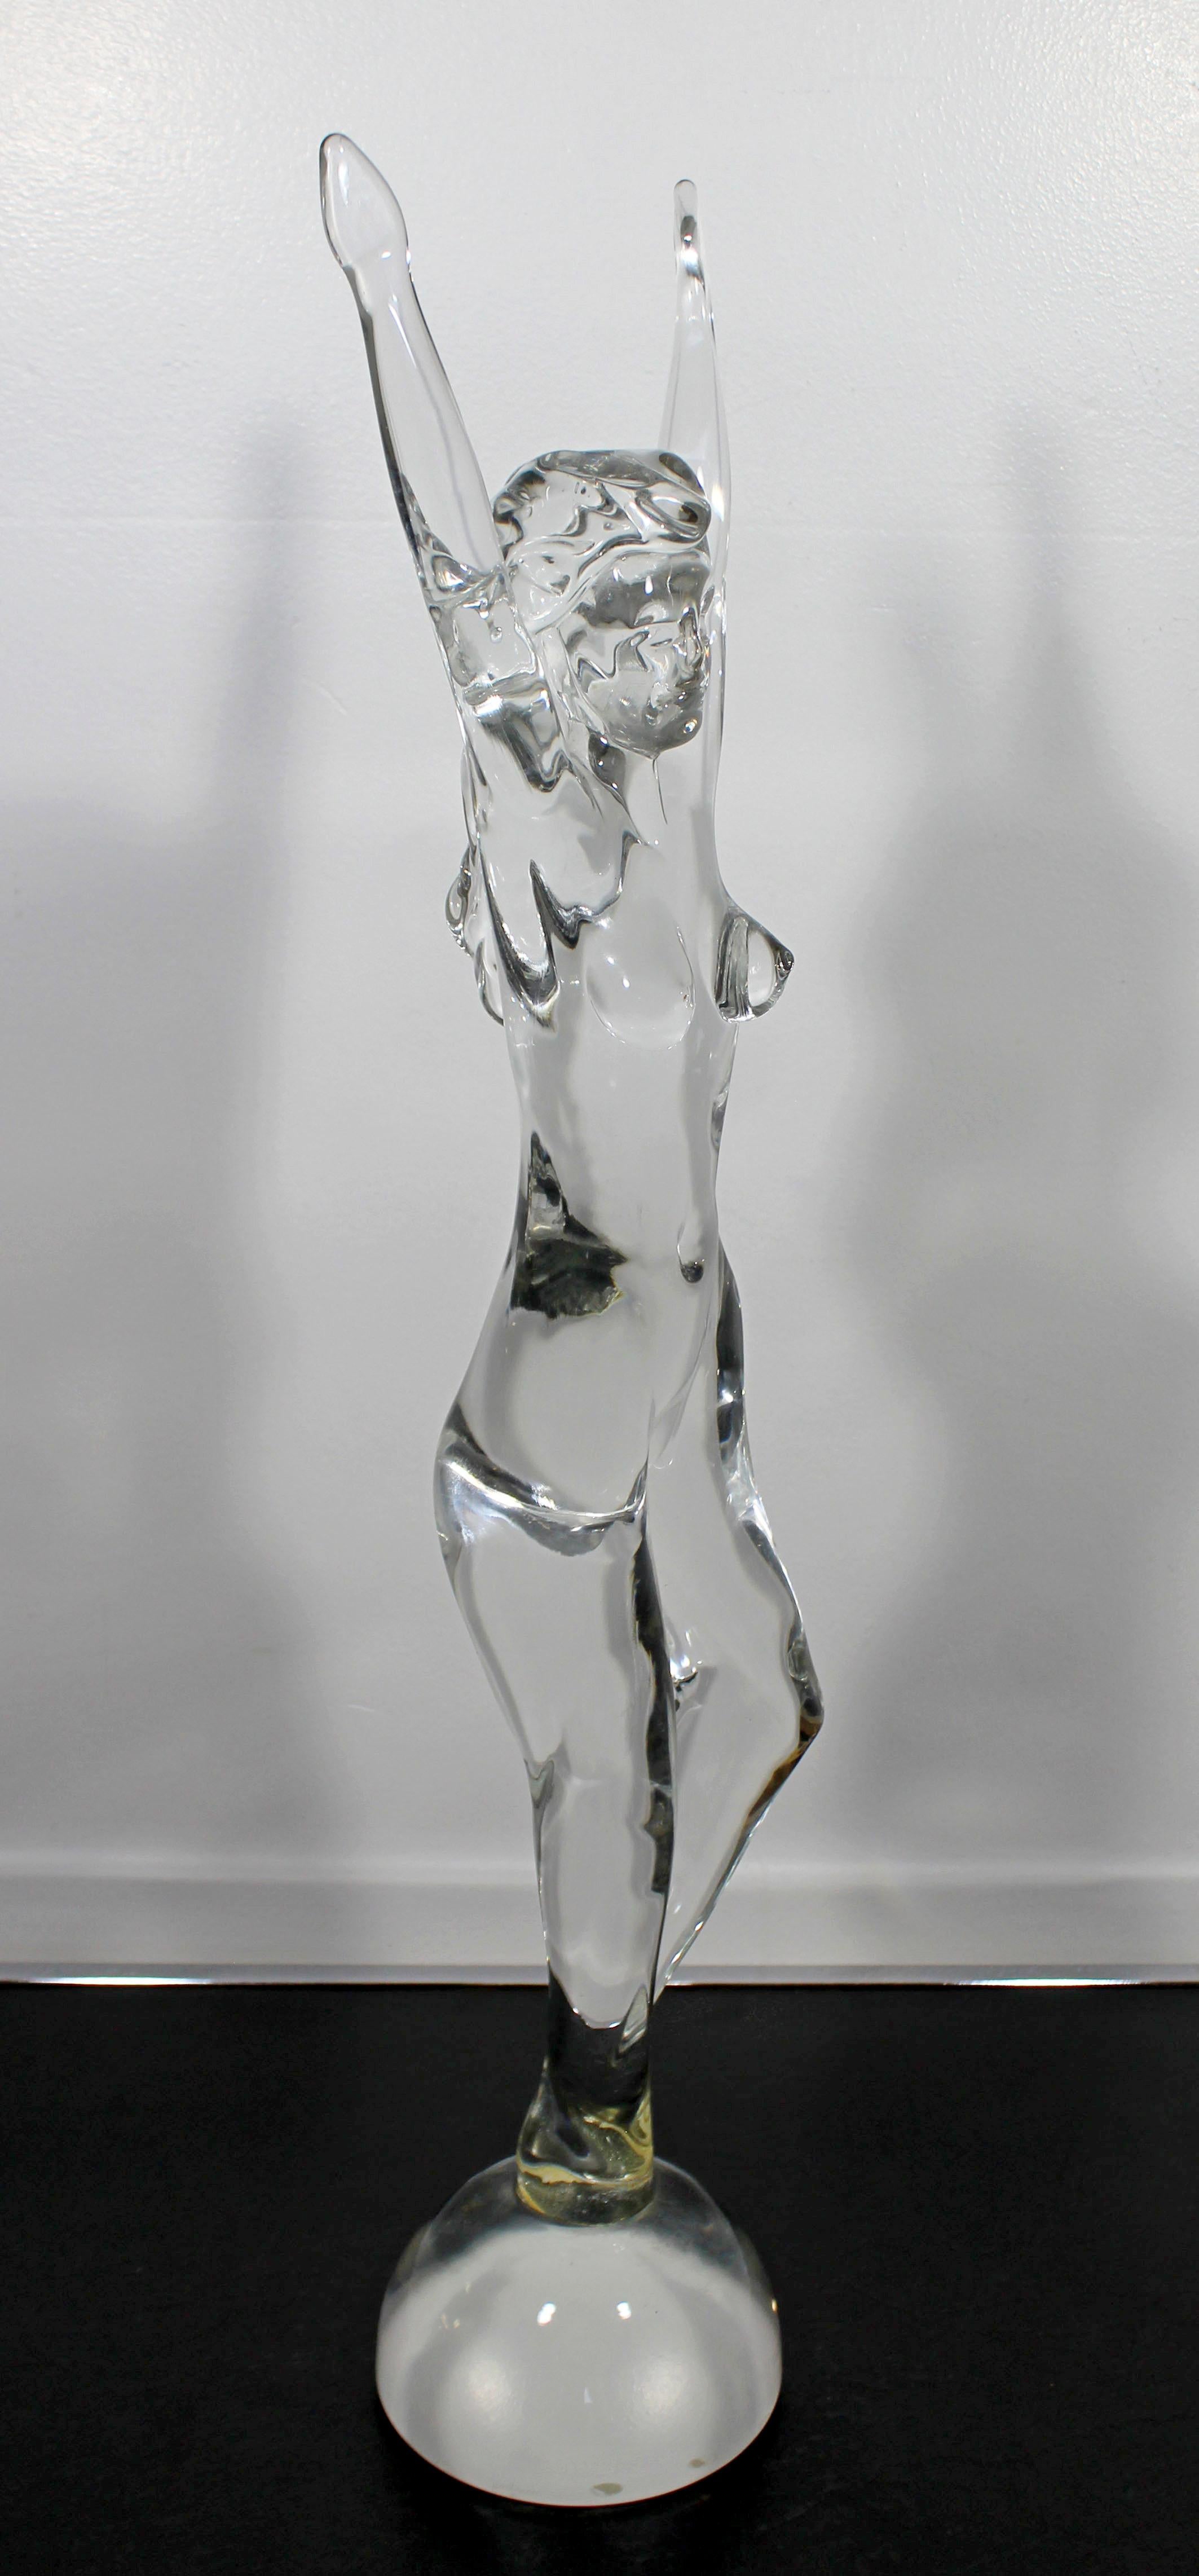 For your consideration is a marvelous, Murano glass art sculpture, of a nude woman, signed Seguso Mazzega, made in Italy, circa 1970s. In excellent condition. The dimensions are 6.25